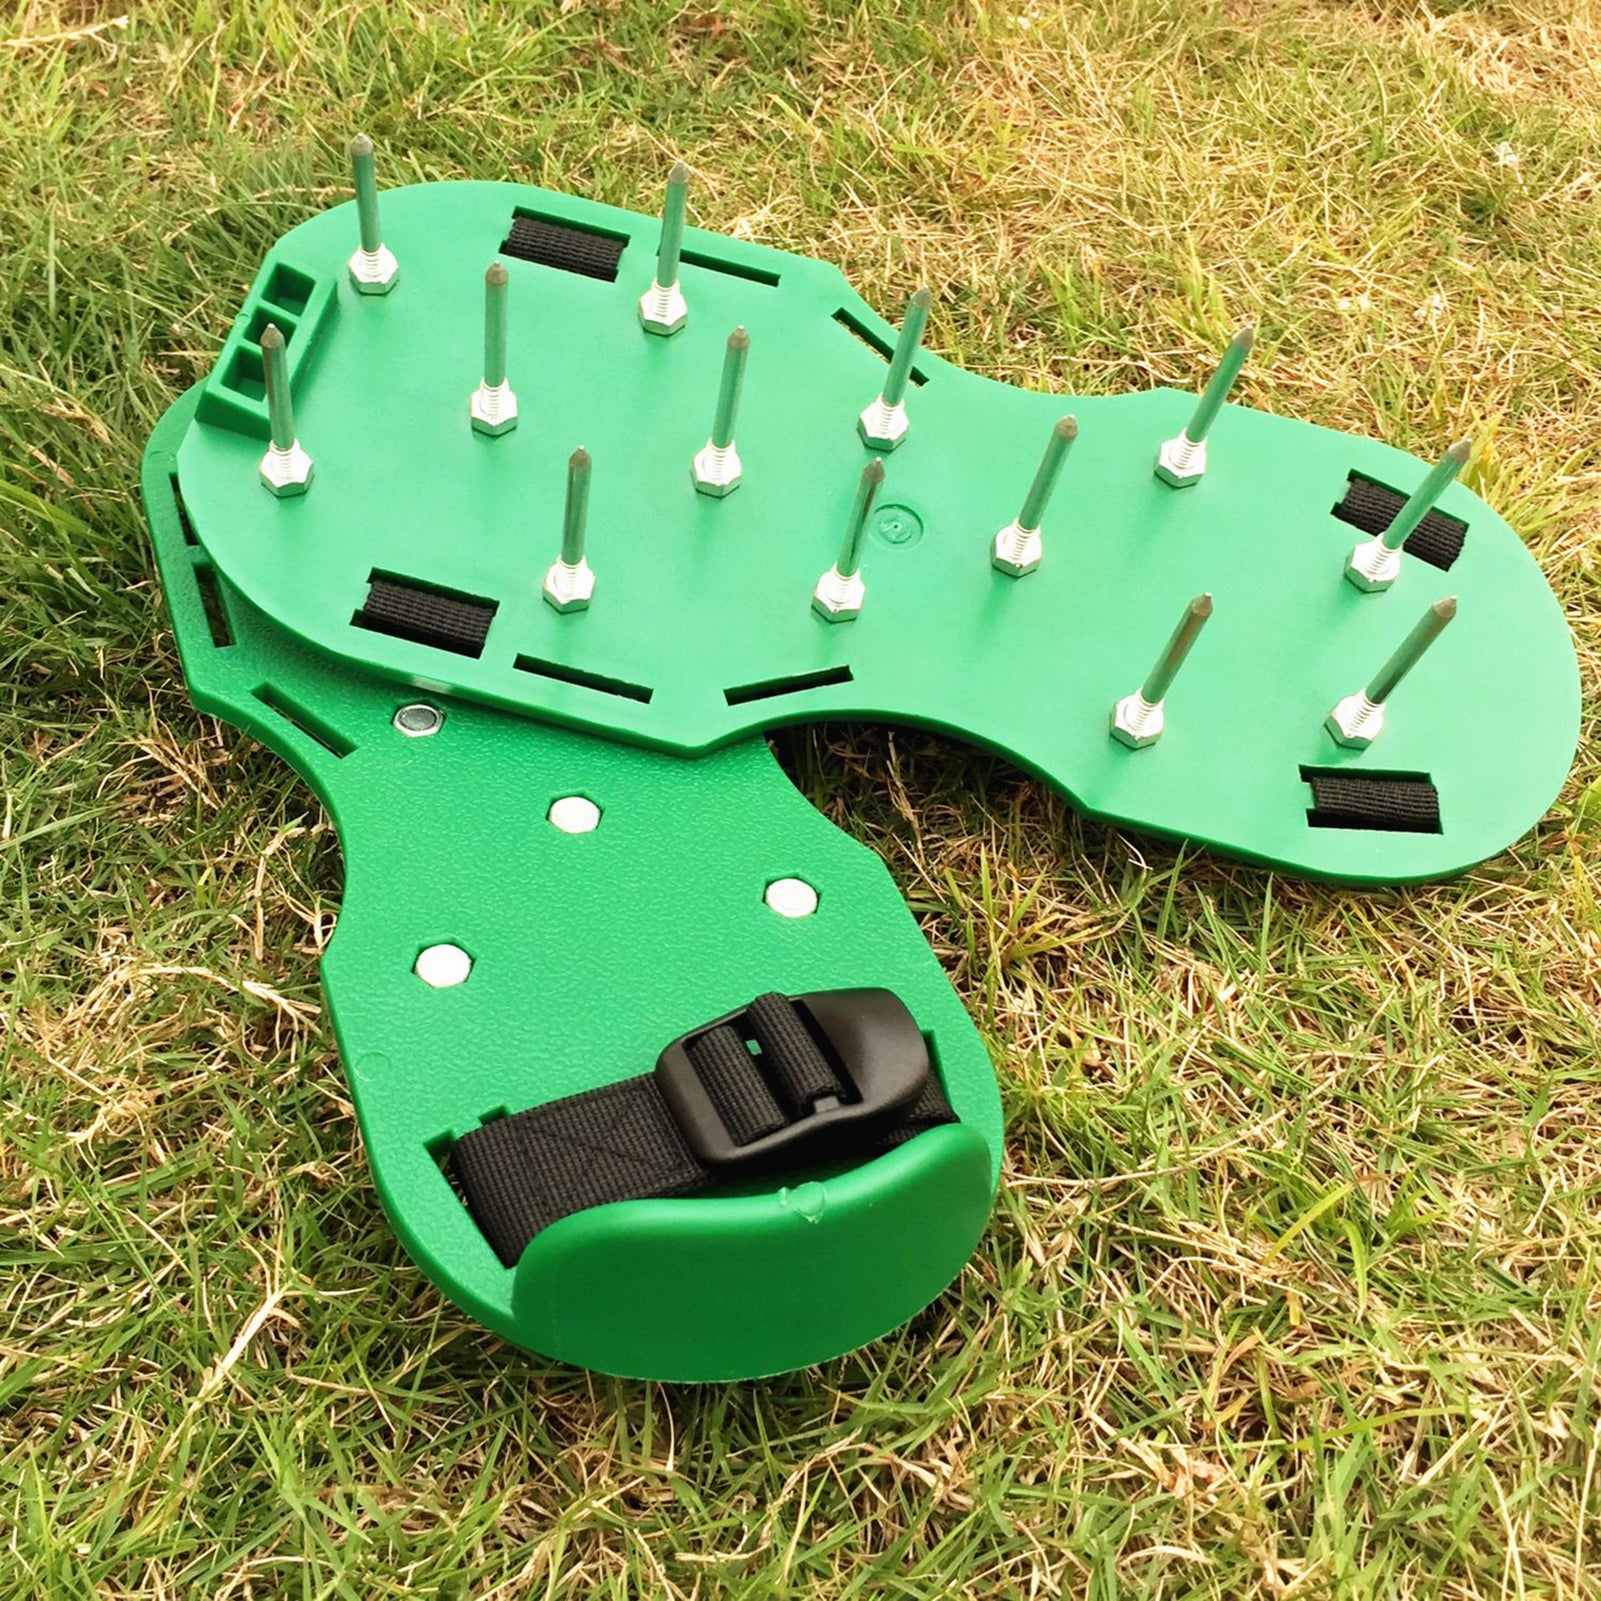 Aibecy Lawn Aerator Shoes Garden Loosen The Soil Nail Shoes